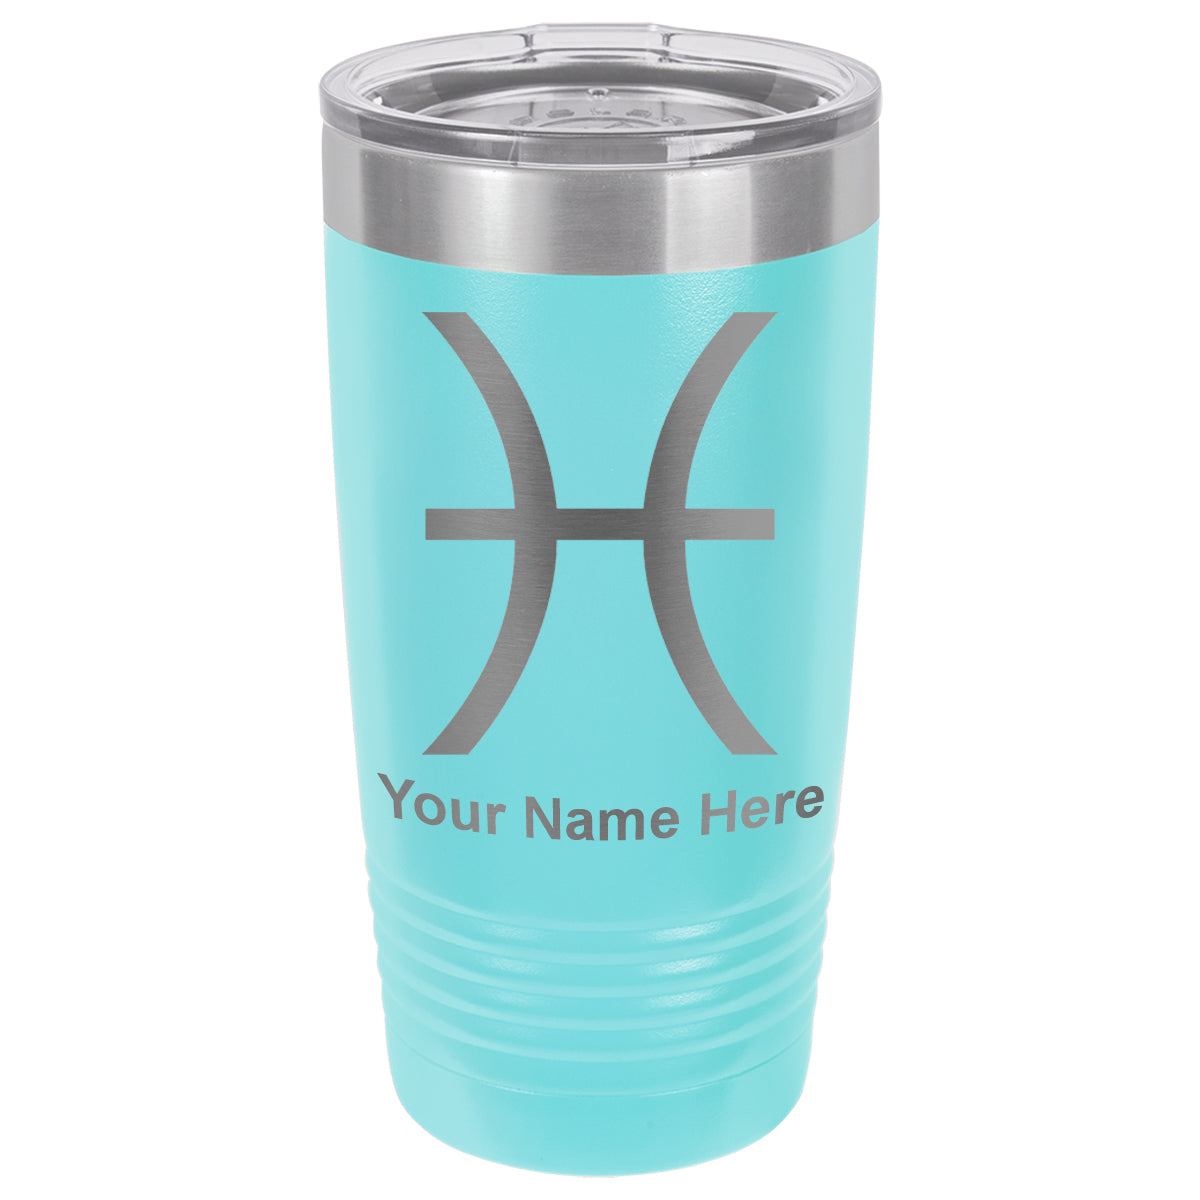 20oz Vacuum Insulated Tumbler Mug, Zodiac Sign Pisces, Personalized Engraving Included